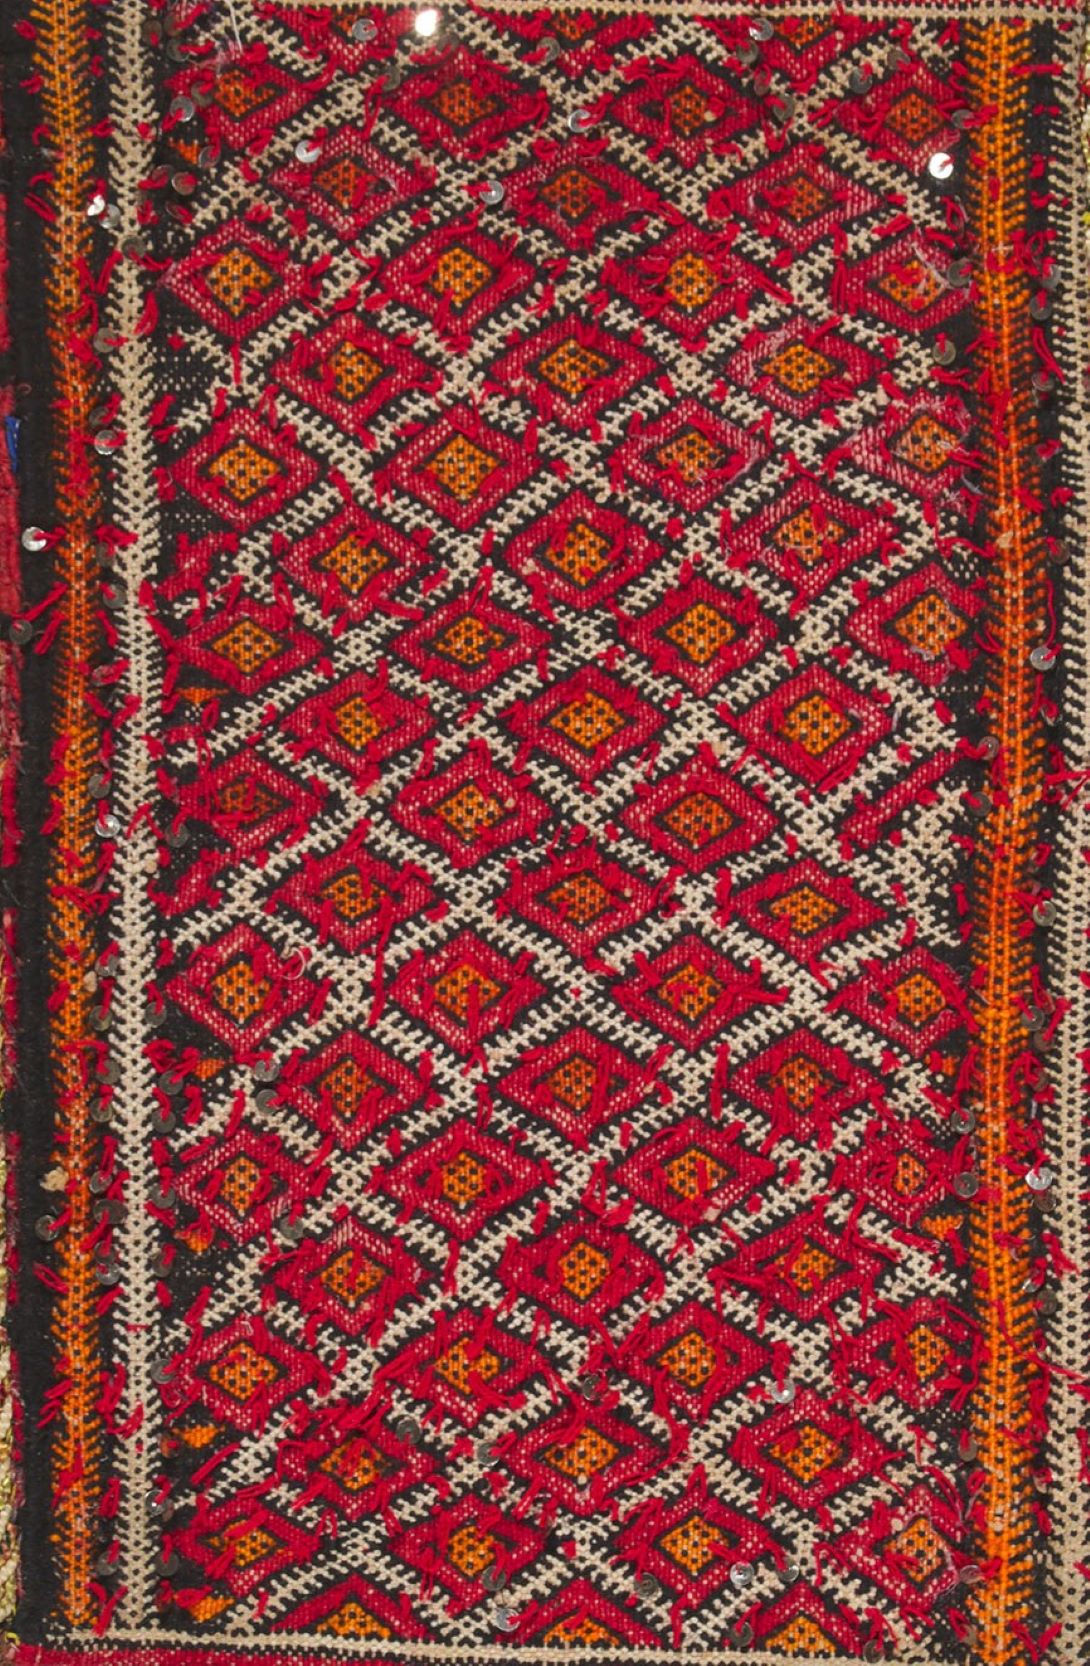 Moroccan tapestry in red, orange, brown, and white colors with two long bands on each side and diamond shapes in the middle.